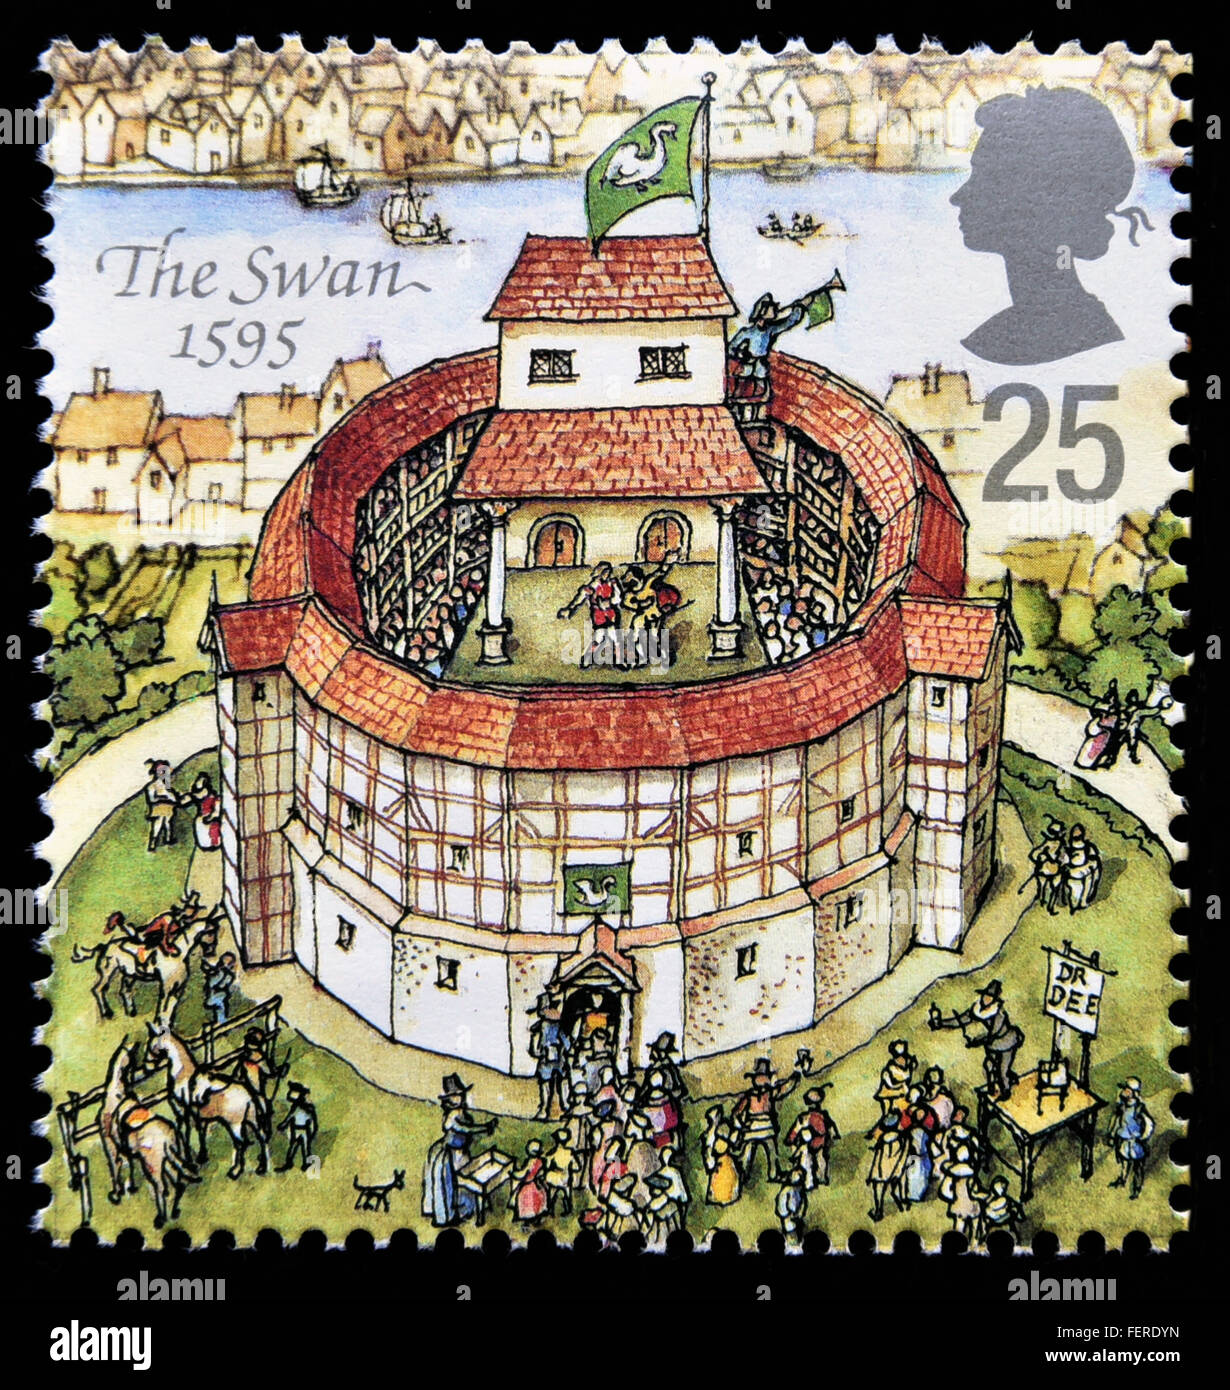 Postage stamp. Great Britain. Queen Elizabeth II. 1995. Reconstruction of Shakespeare's Globe Theatre. The Swan 1595. Stock Photo